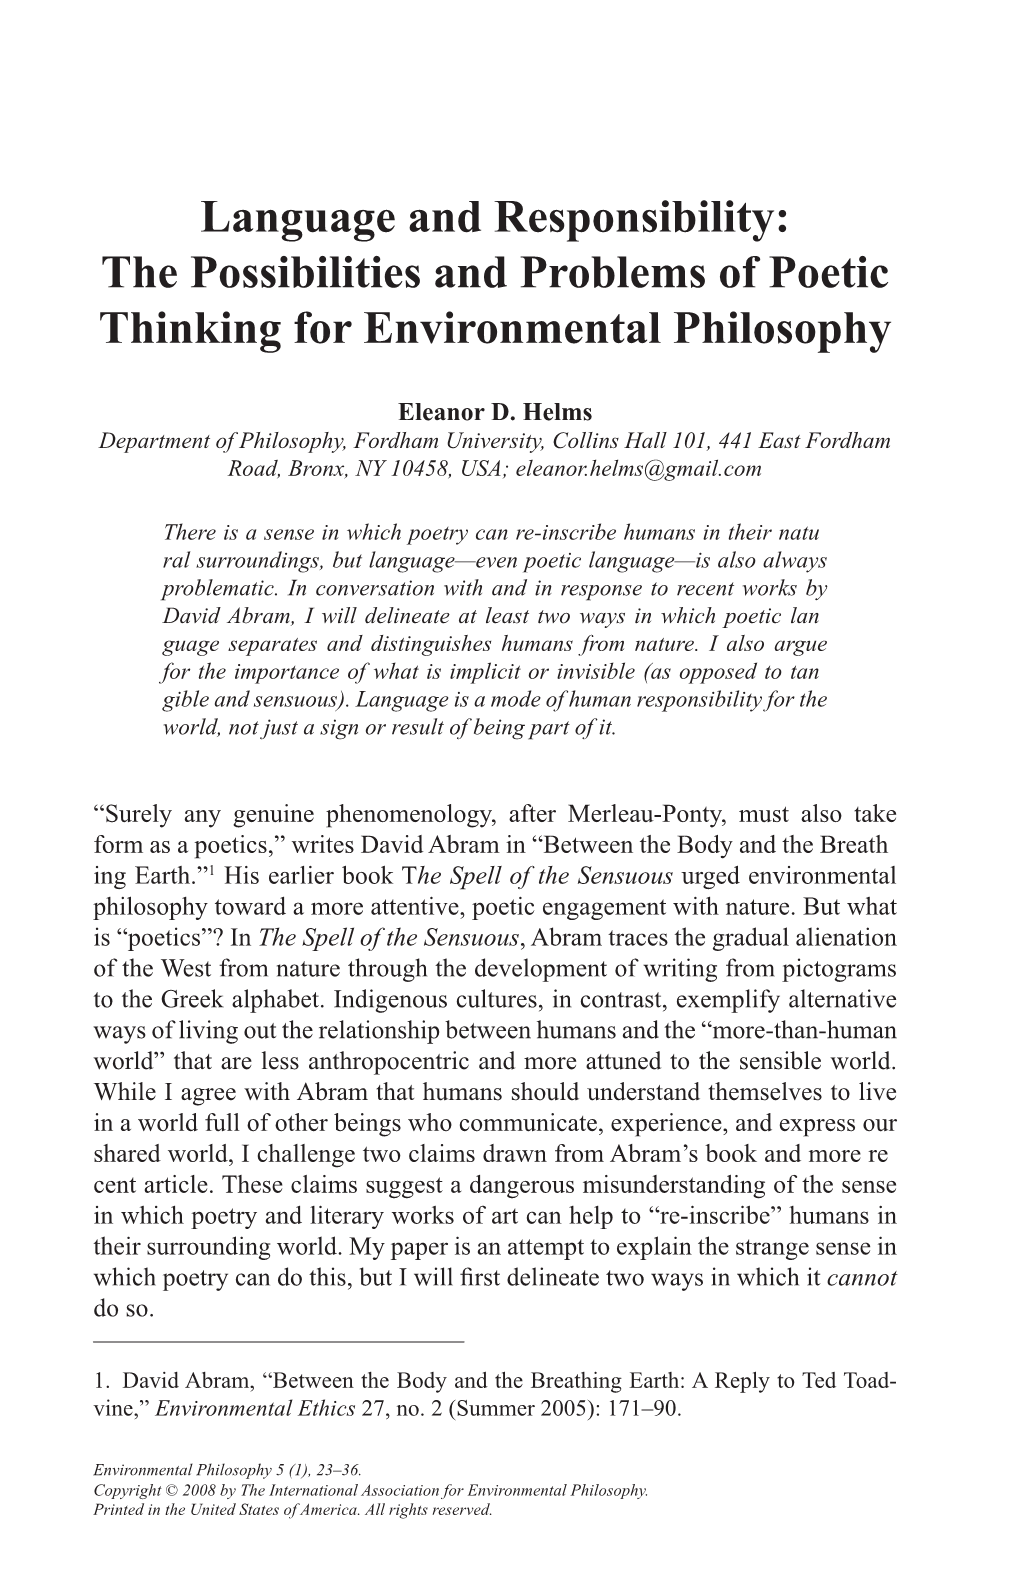 Language and Responsibility: the Possibilities and Problems of Poetic Thinking for Environmental Philosophy